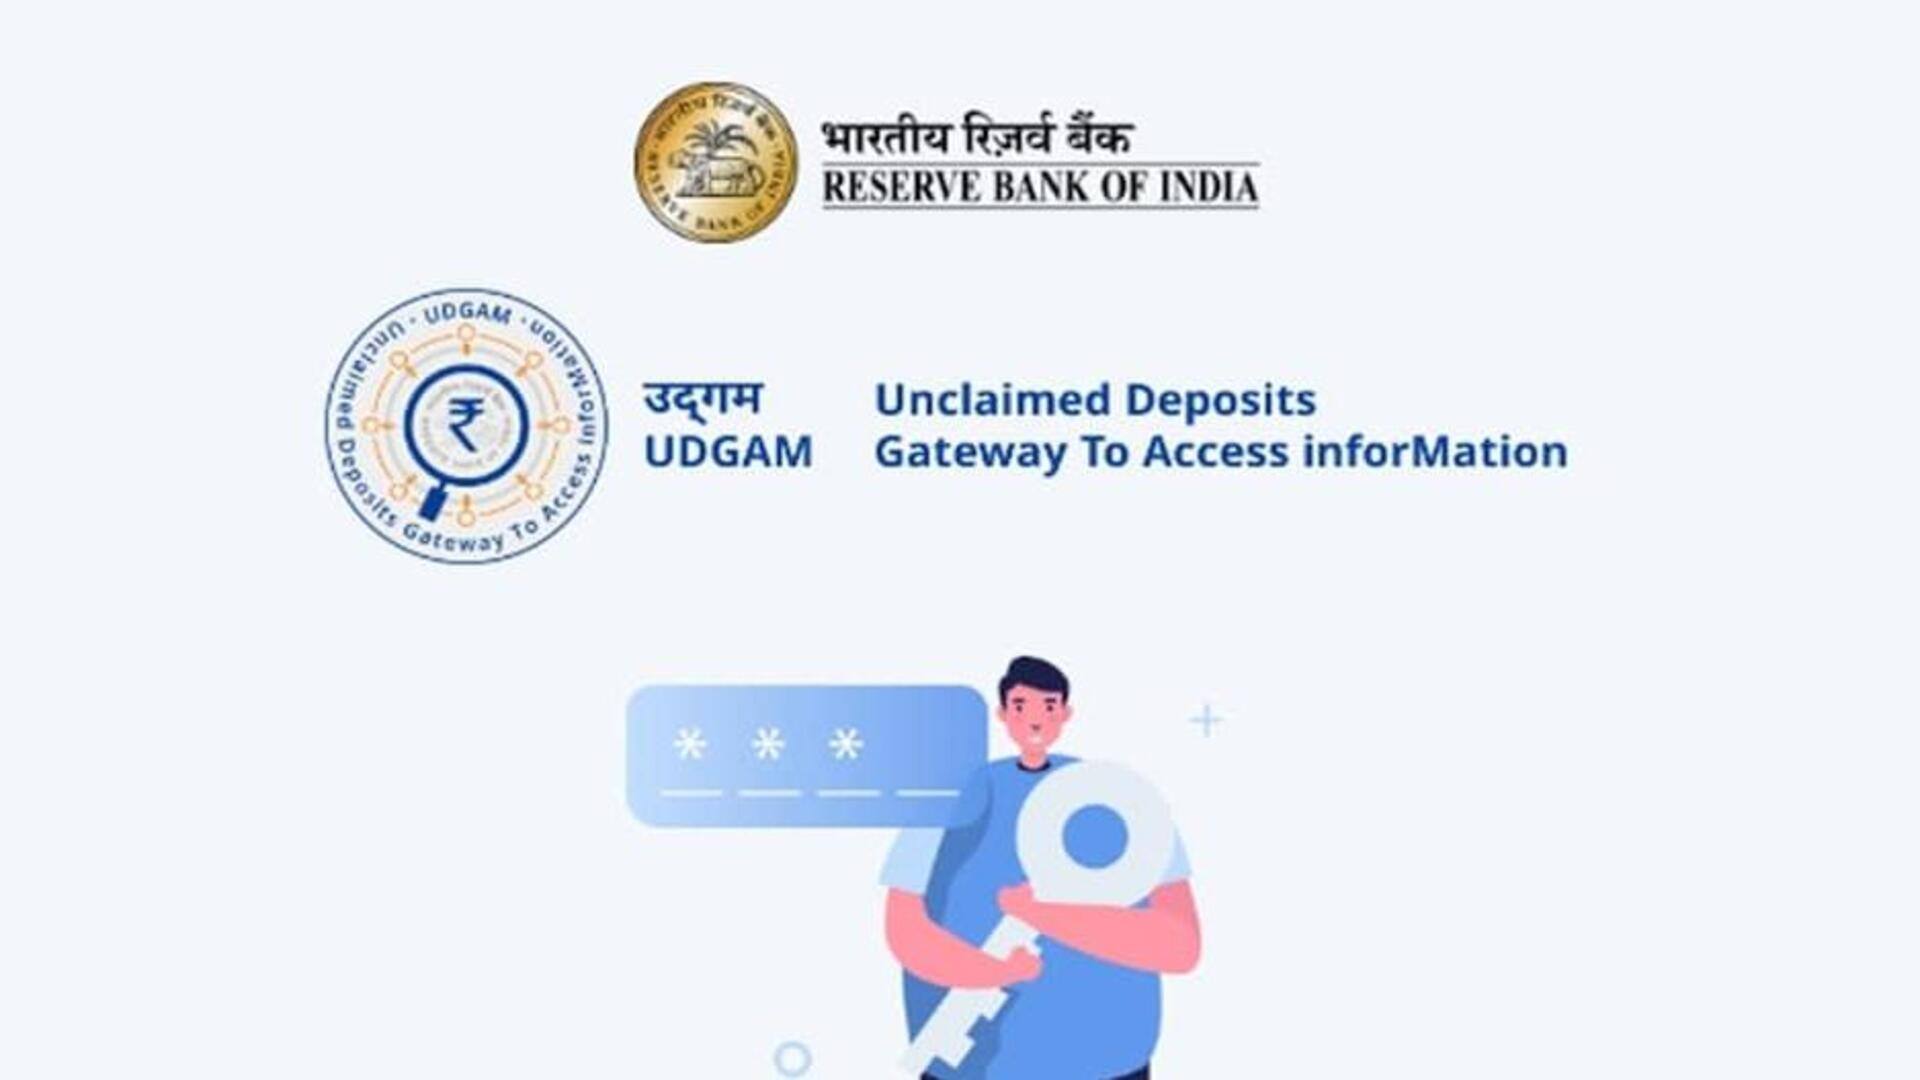 RBI's UDGAM portal helps you find and claim unclaimed deposits